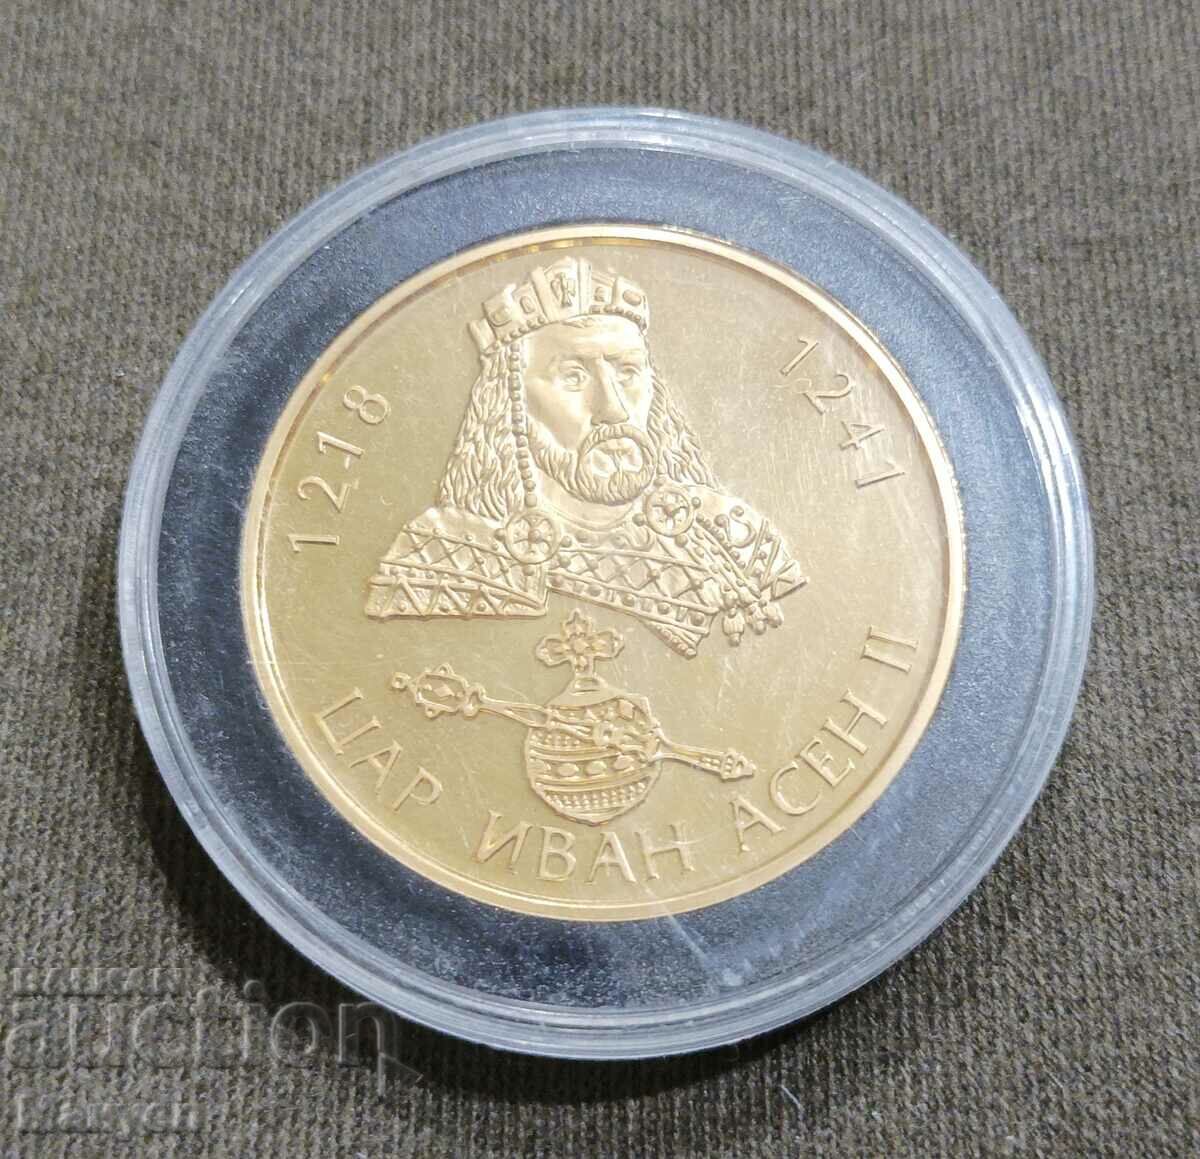 I am selling a Bulgarian coin, a plaque in a hood